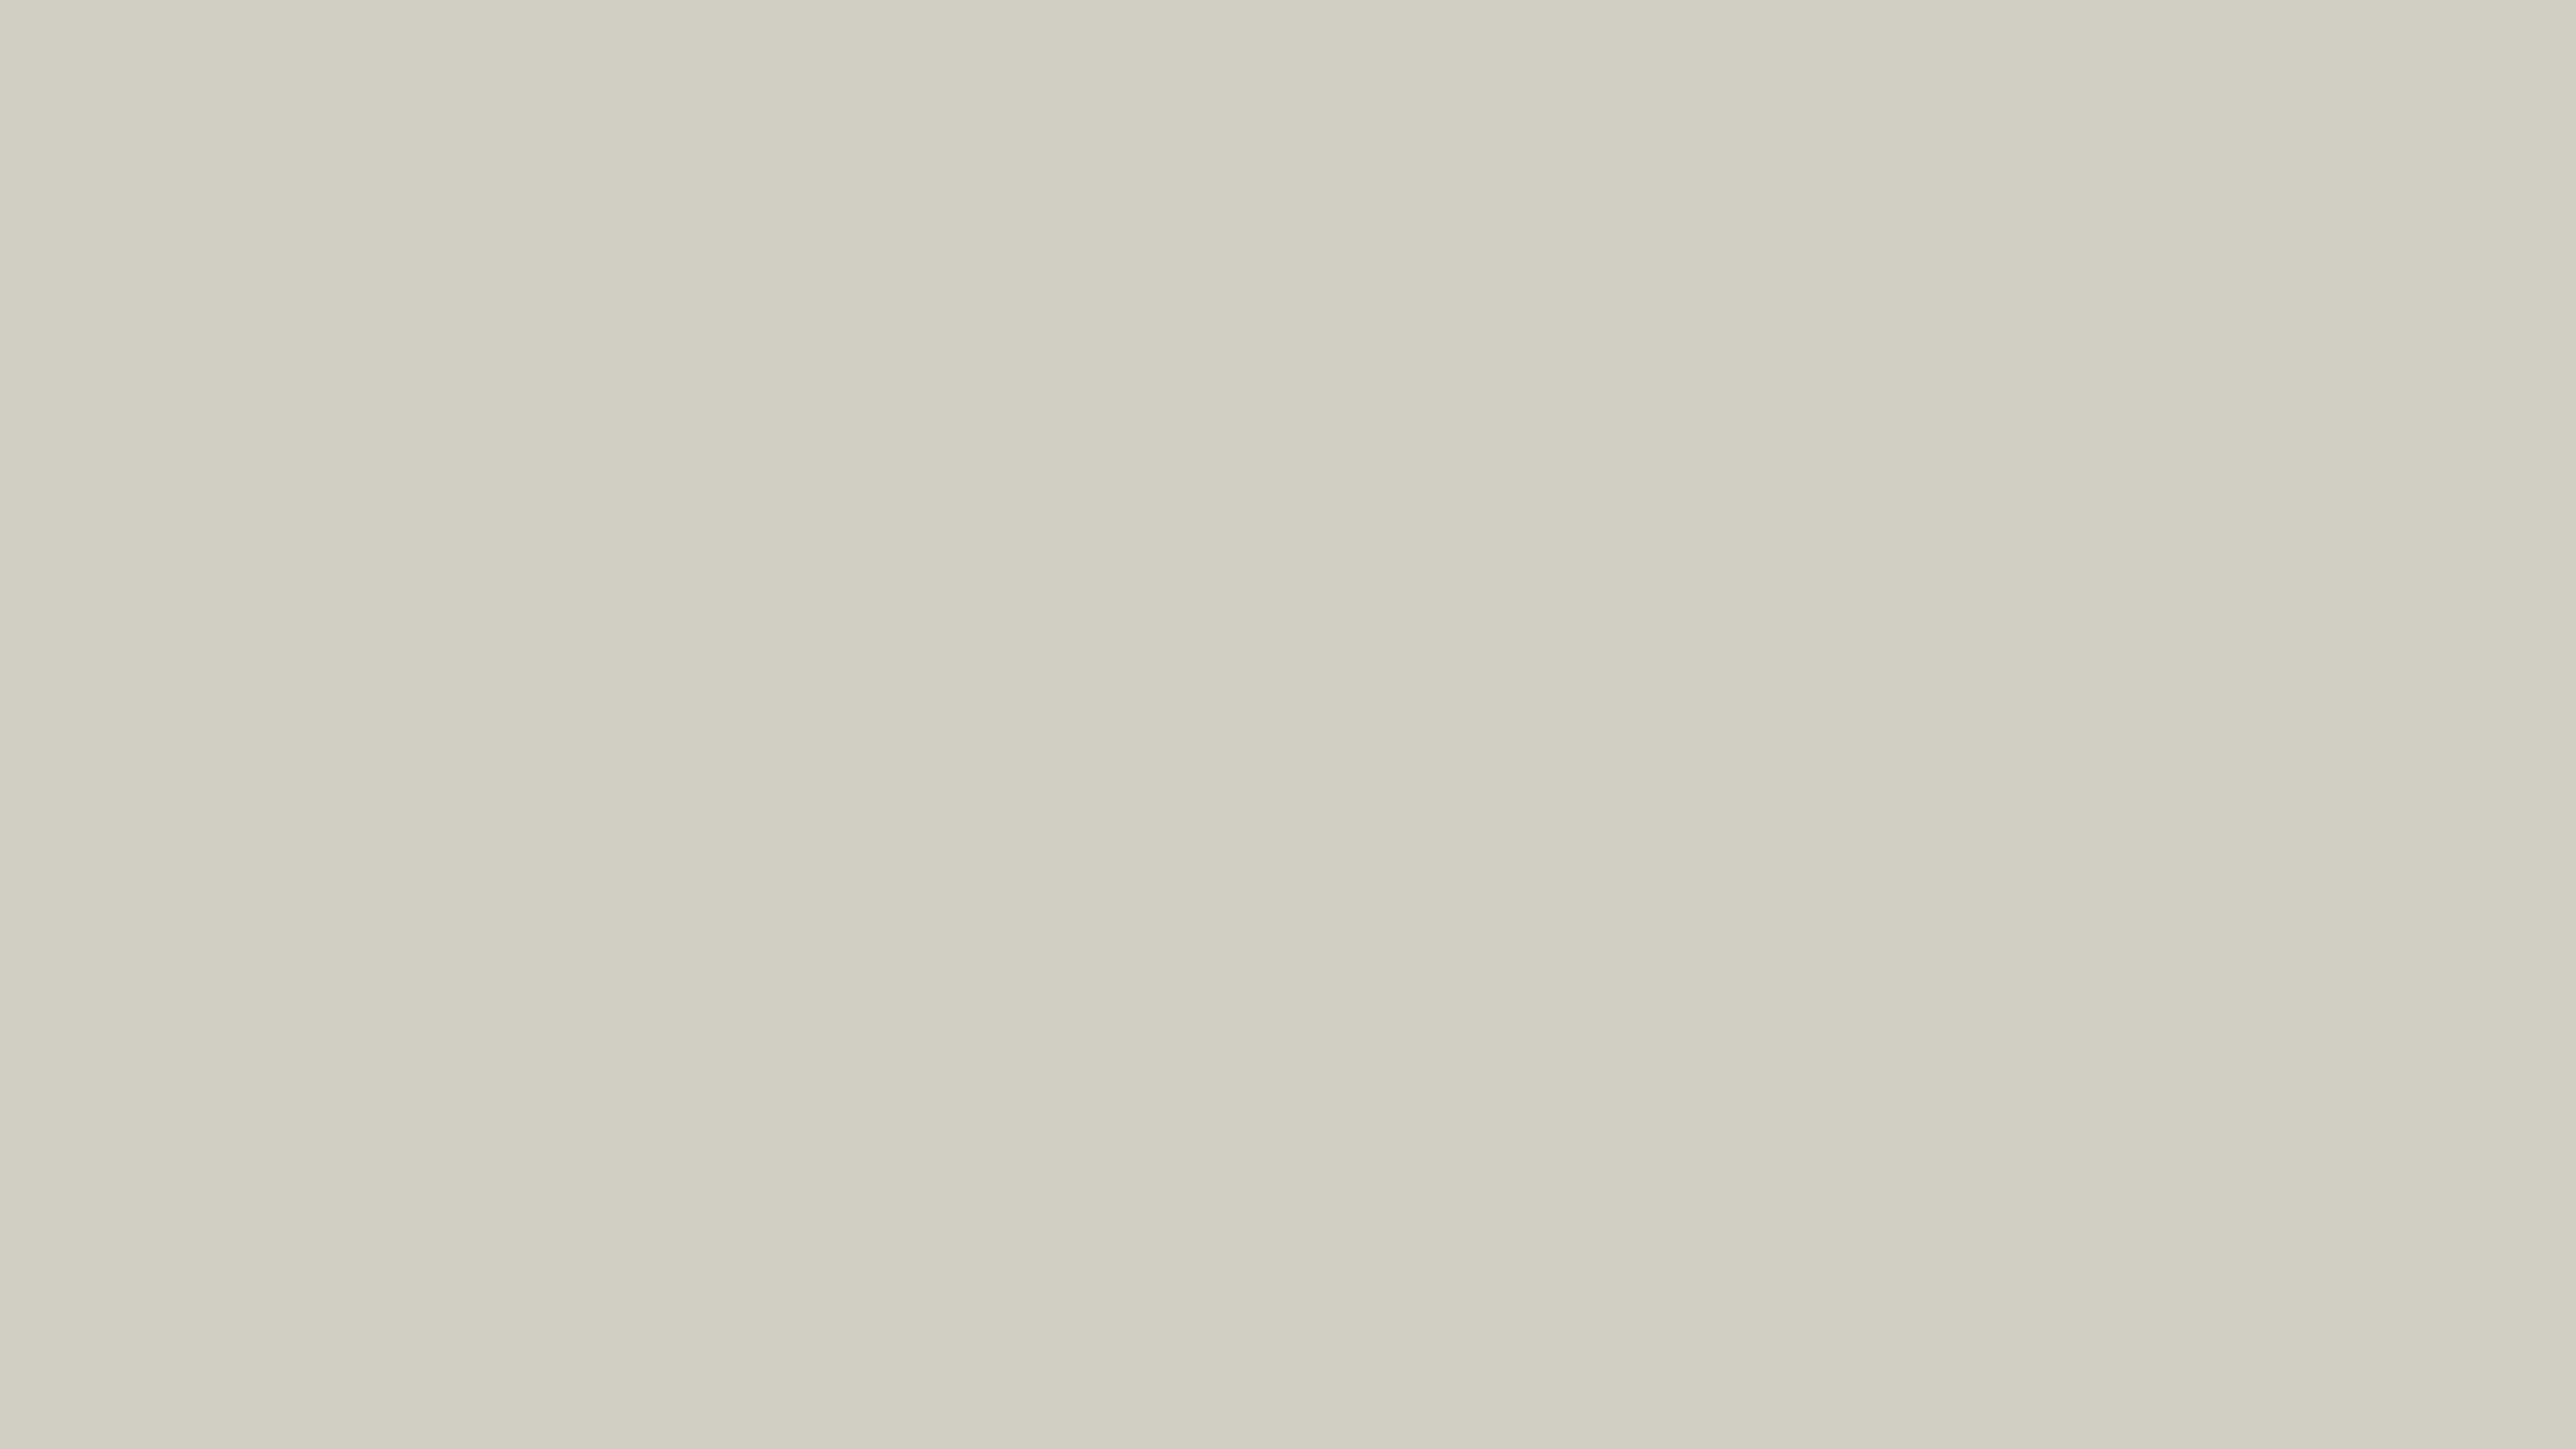 5120x2880 Pastel Gray Solid Color Background